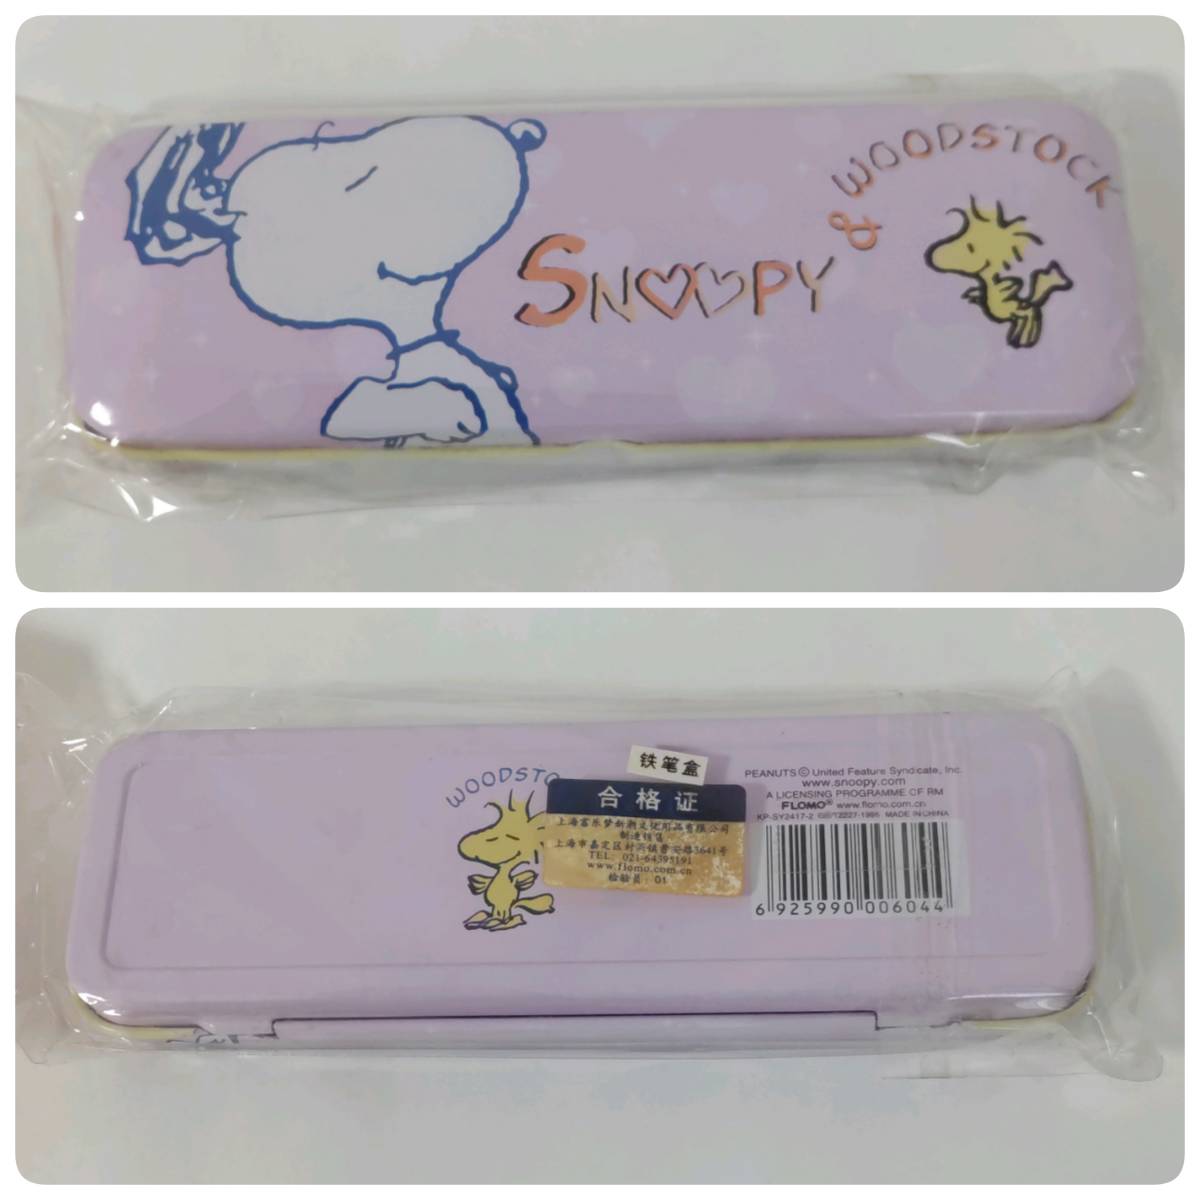  Snoopy Woodstock can pen case writing brush box 